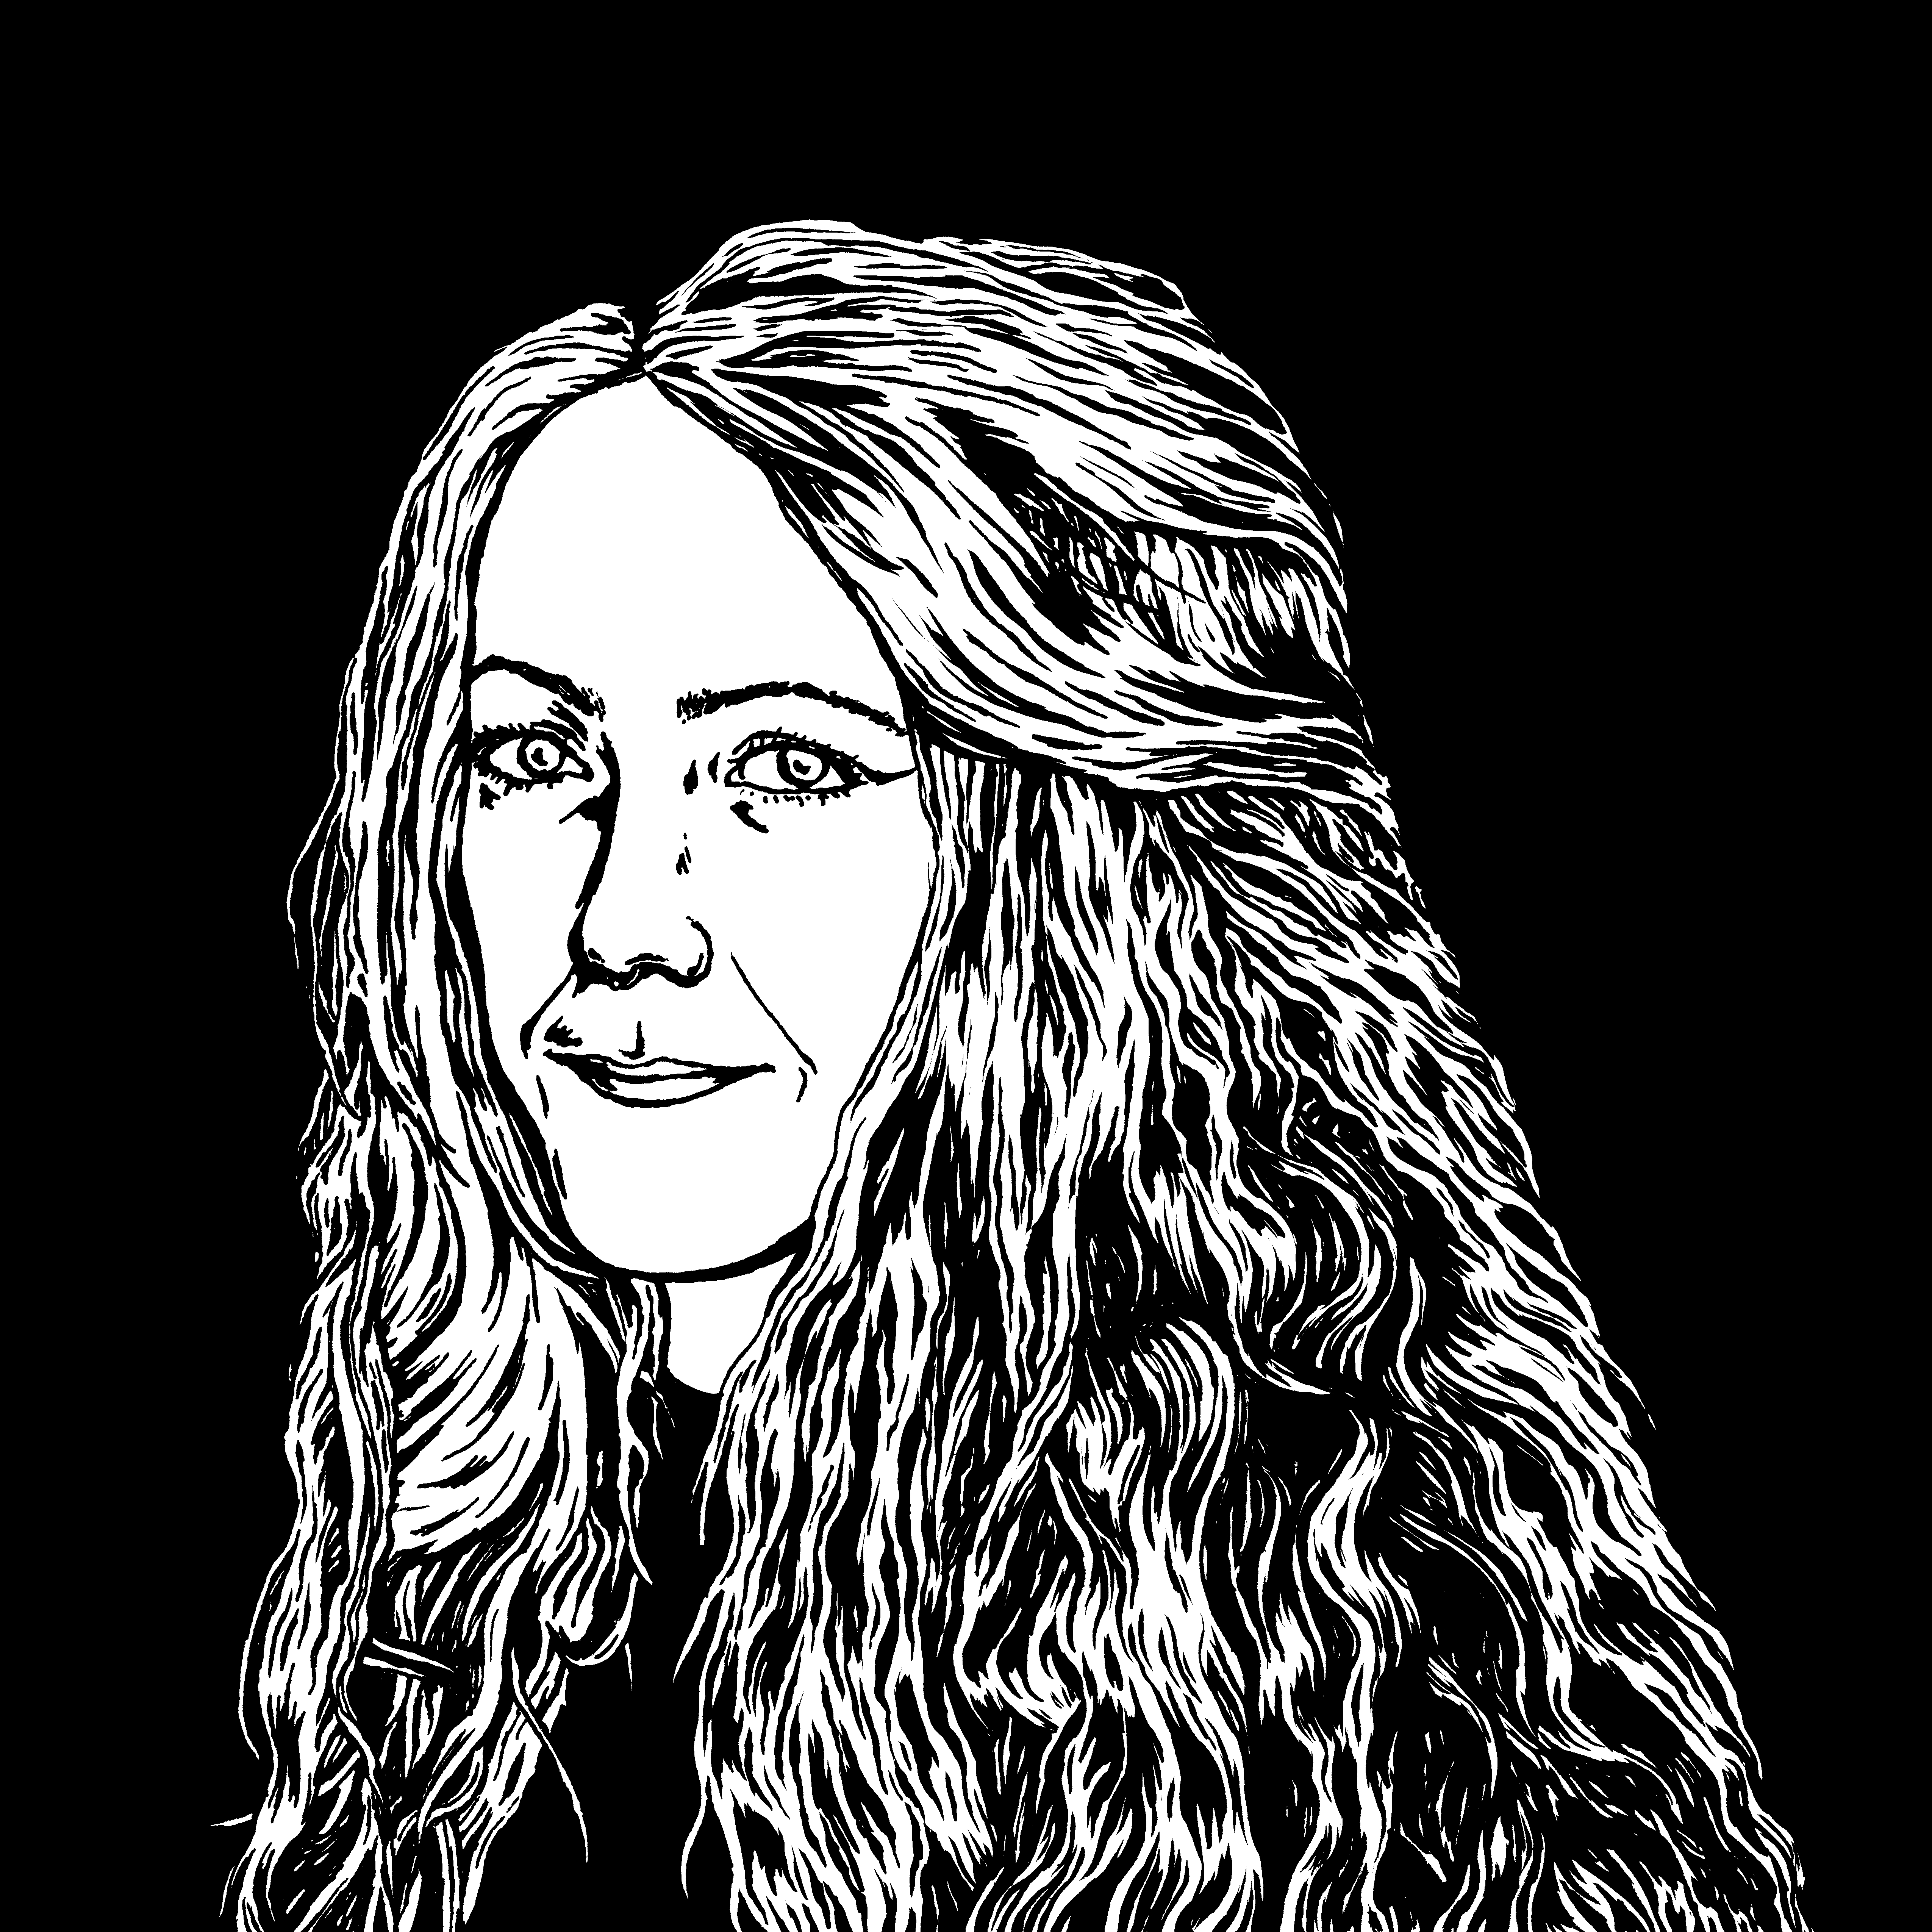 Black and white illustration of a woman with long wavy hair